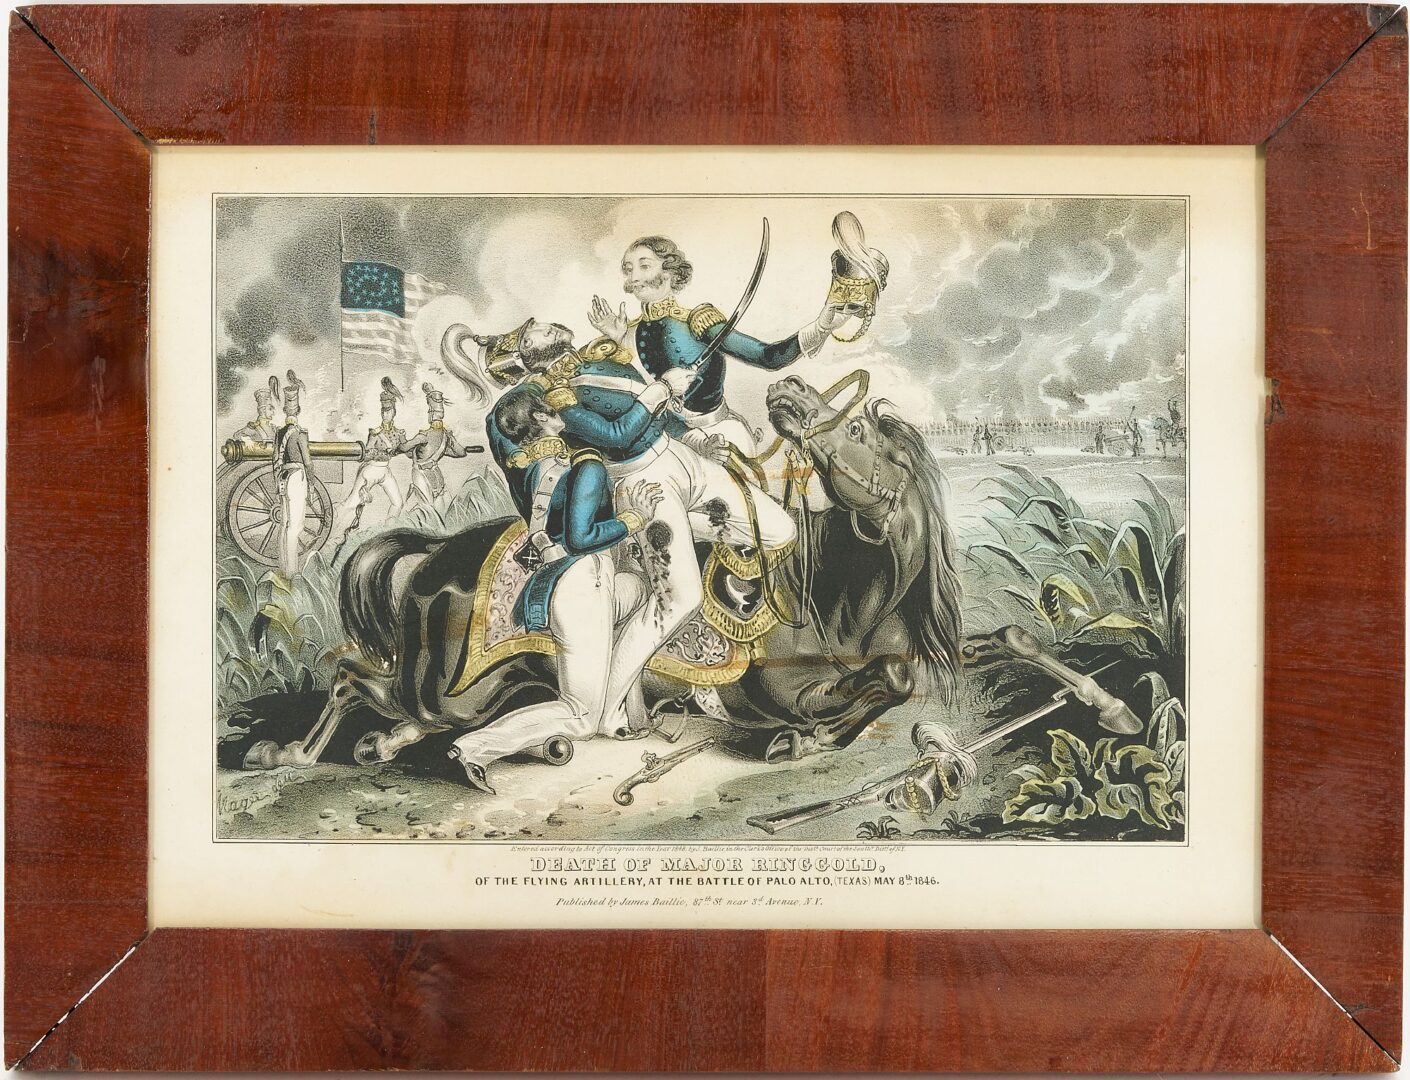 Lot 939: 6 American Historical Prints Relating to Mexican War, incl. Currier & Ives